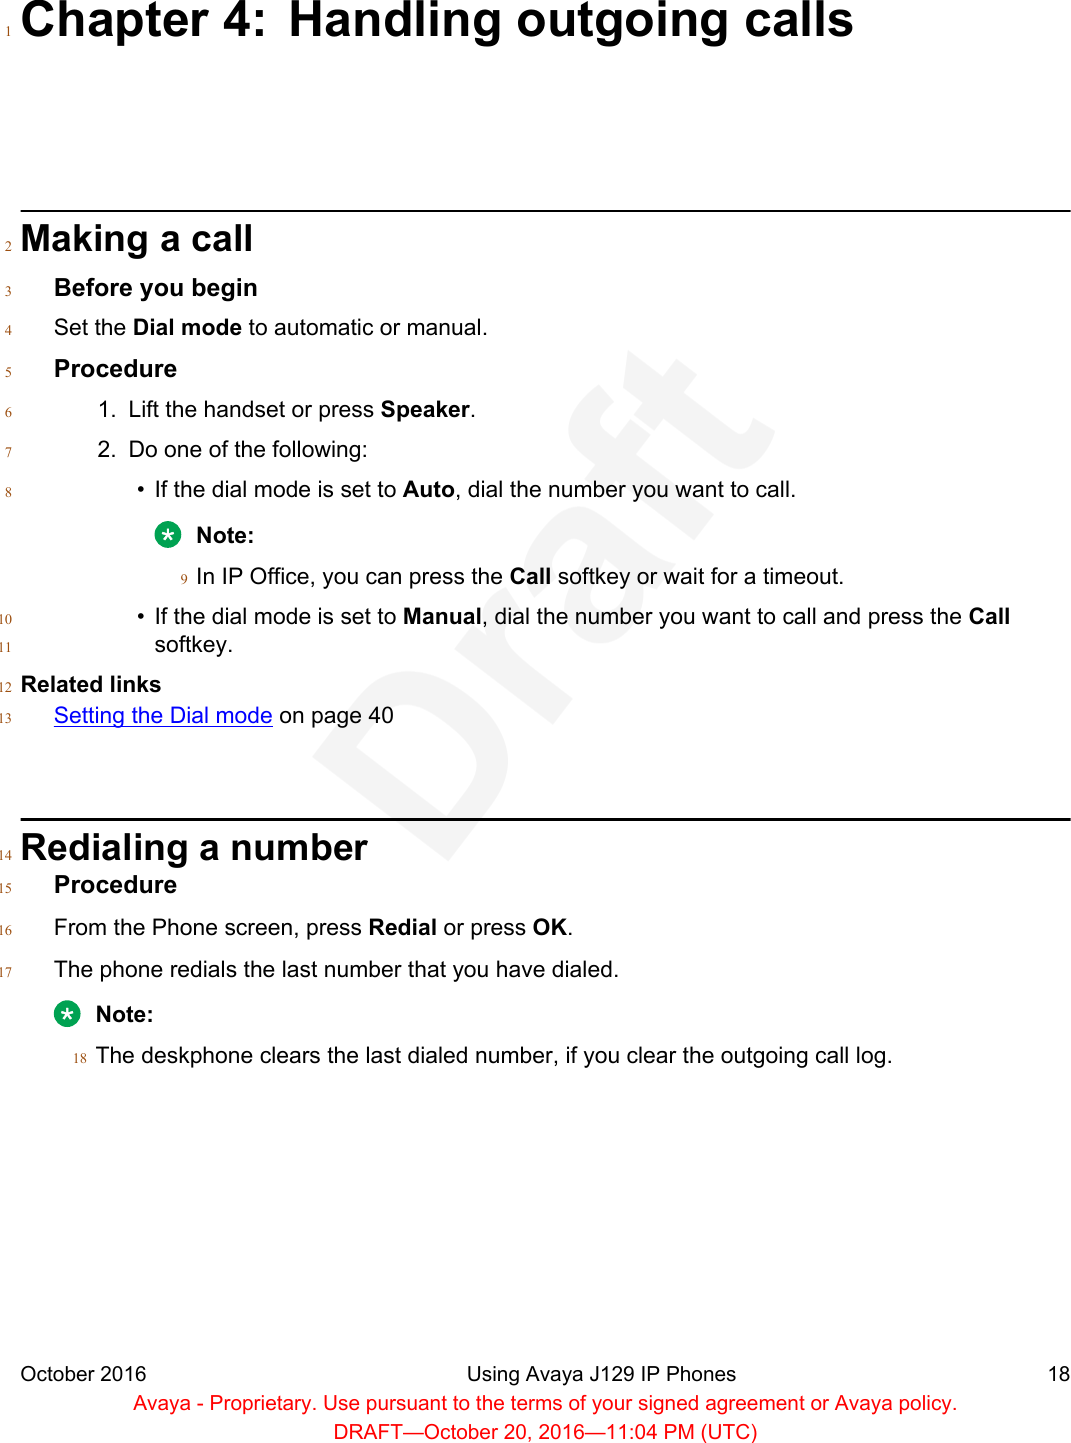 Chapter 4: Handling outgoing calls1Making a call2Before you begin3Set the Dial mode to automatic or manual.4Procedure51. Lift the handset or press Speaker.62. Do one of the following:7• If the dial mode is set to Auto, dial the number you want to call.8Note:In IP Office, you can press the Call softkey or wait for a timeout.9• If the dial mode is set to Manual, dial the number you want to call and press the Call10softkey.11Related links12Setting the Dial mode on page 4013Redialing a number14Procedure15From the Phone screen, press Redial or press OK.16The phone redials the last number that you have dialed.17Note:The deskphone clears the last dialed number, if you clear the outgoing call log.18October 2016 Using Avaya J129 IP Phones 18Avaya - Proprietary. Use pursuant to the terms of your signed agreement or Avaya policy.DRAFT—October 20, 2016—11:04 PM (UTC)